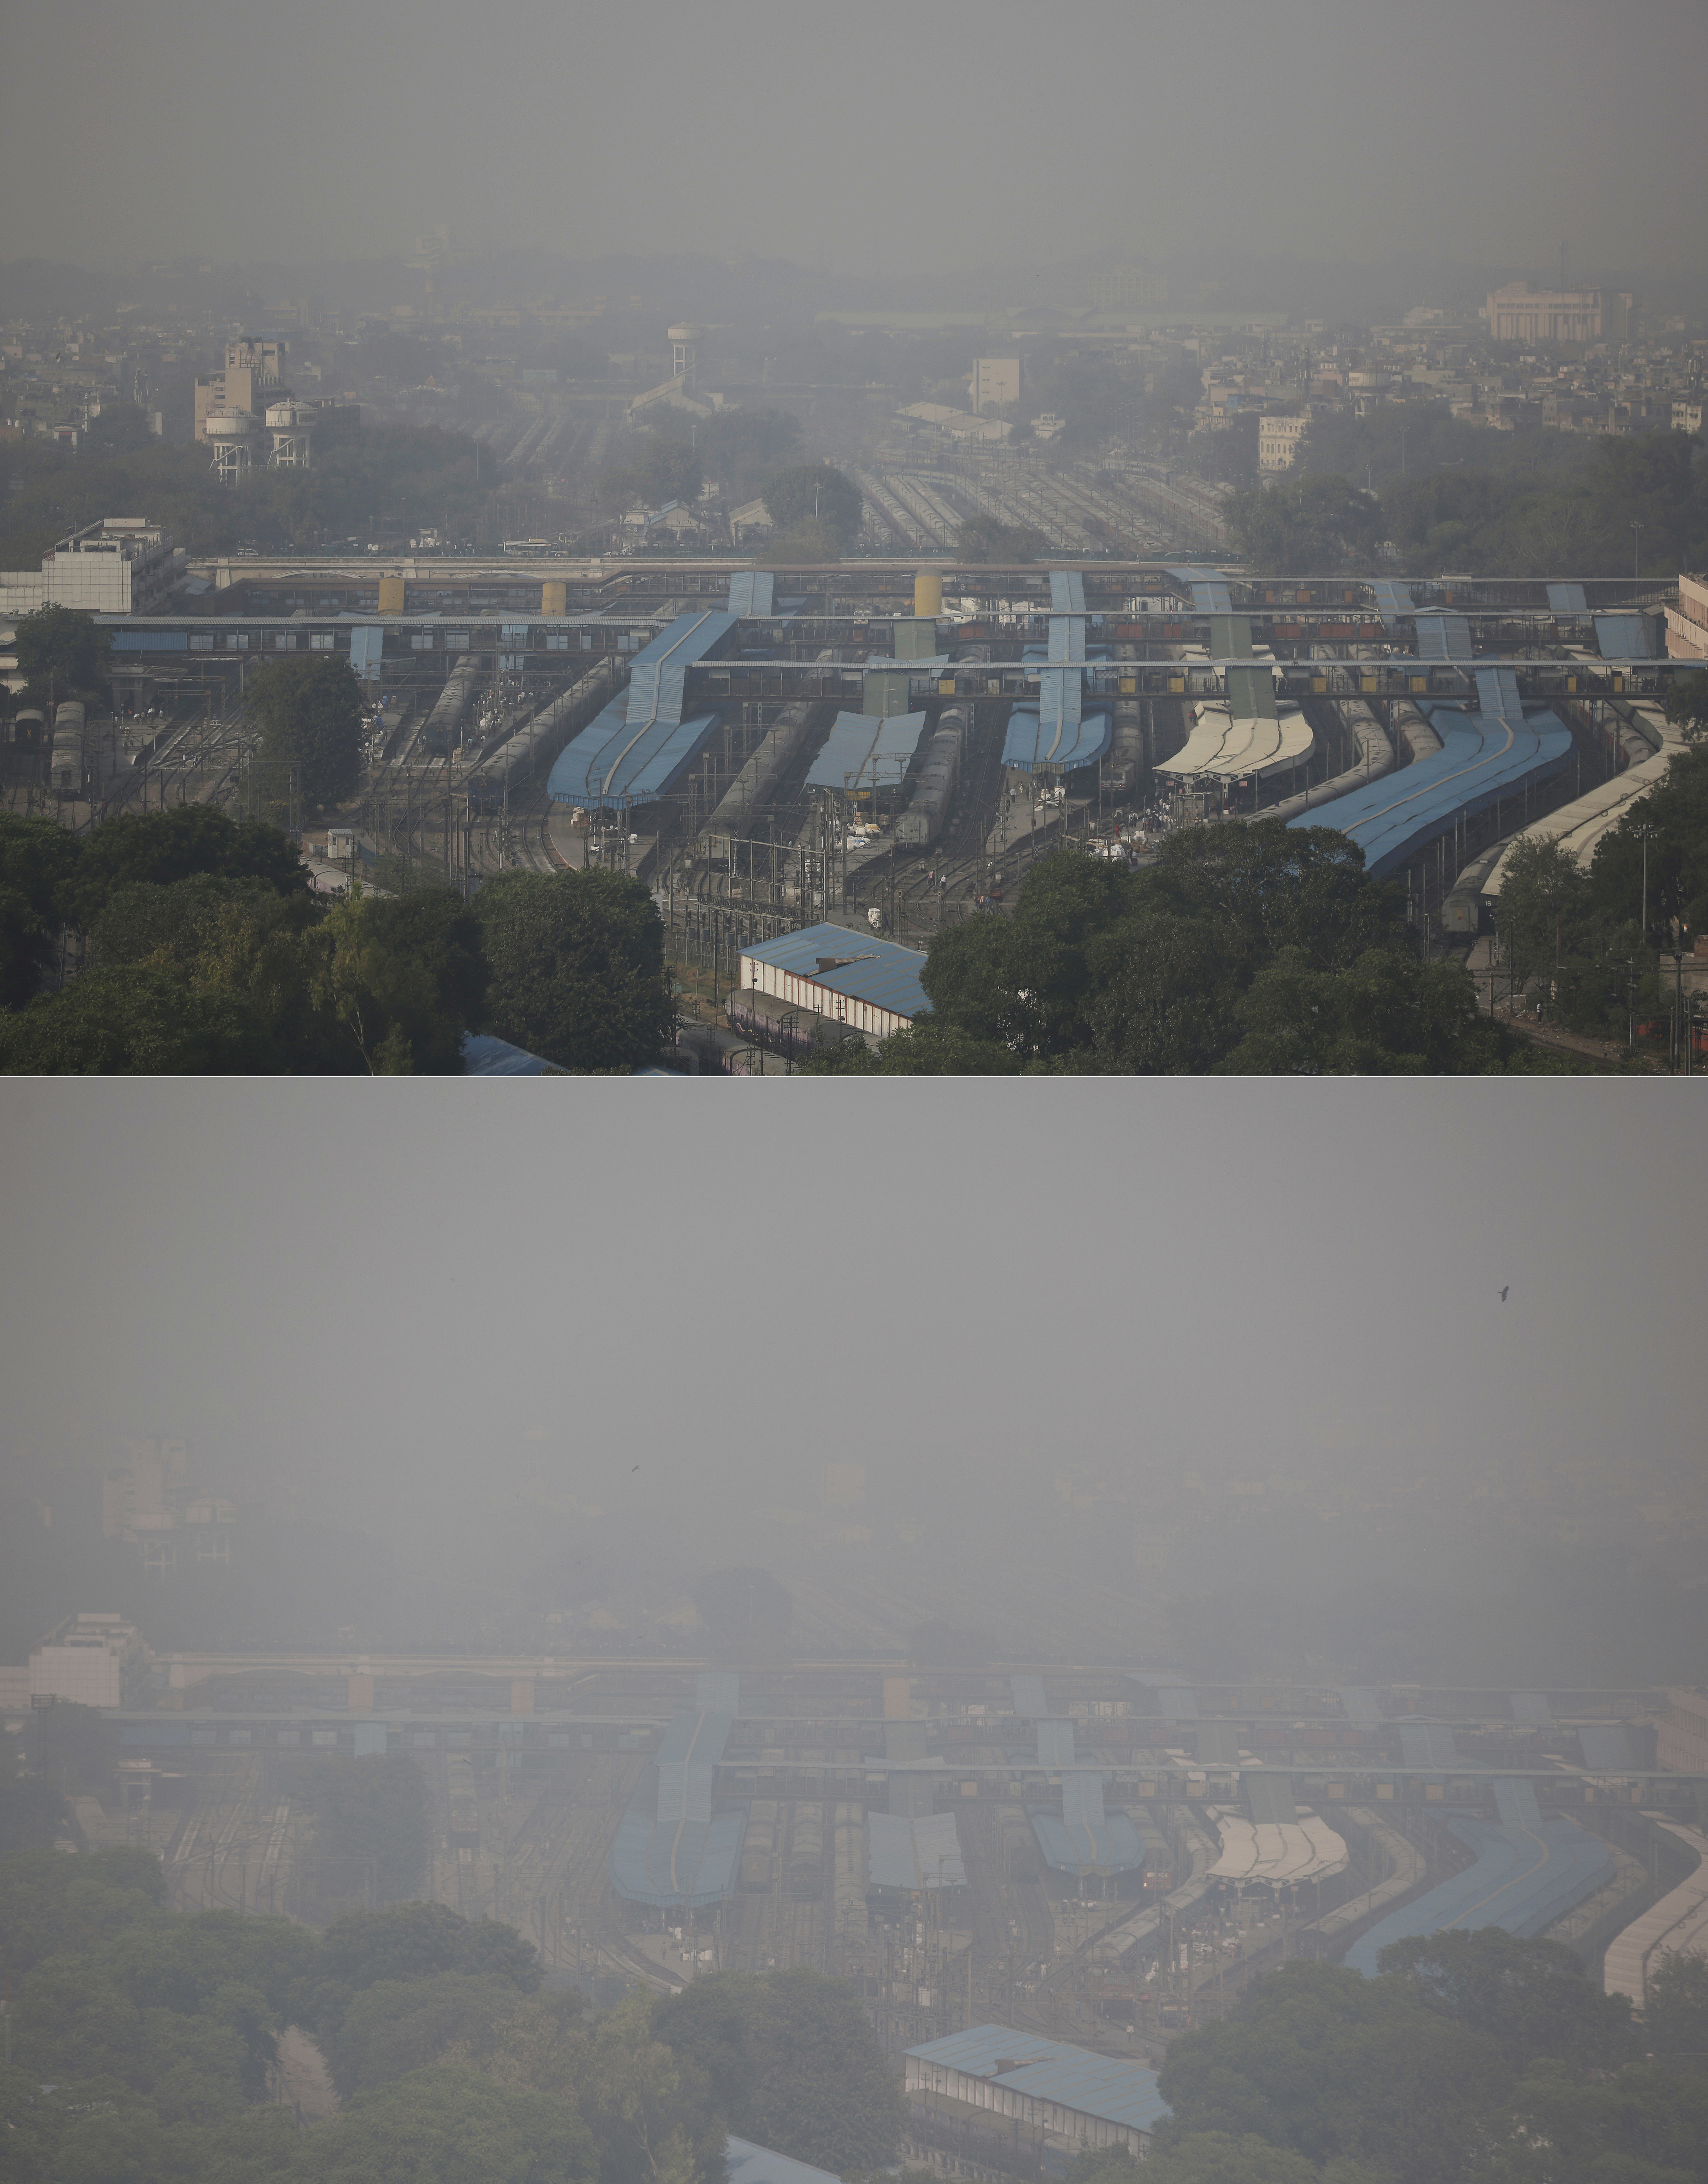 In this combination of two photos, the New Delhi skyline is seen enveloped in smog over a railway station on Friday, Oct. 28, 2016, top, and a day after Diwali festival on Monday, Oct. 31, 2016, bottom. As Indians wake Monday to smoke-filled skies from a weekend of festival fireworks for the Hindu holiday of Diwali, New Delhi's worst season for air pollution begins, with dire consequences. A new report from UNICEF says about a third of the 2 billion children in the world who are breathing toxic air live in northern India and neighboring countries, risking serious health effects including damage to their lungs, brains and other organs. (AP Photo/Altaf Qadri, top, and Tsering Topgyal, bottom)